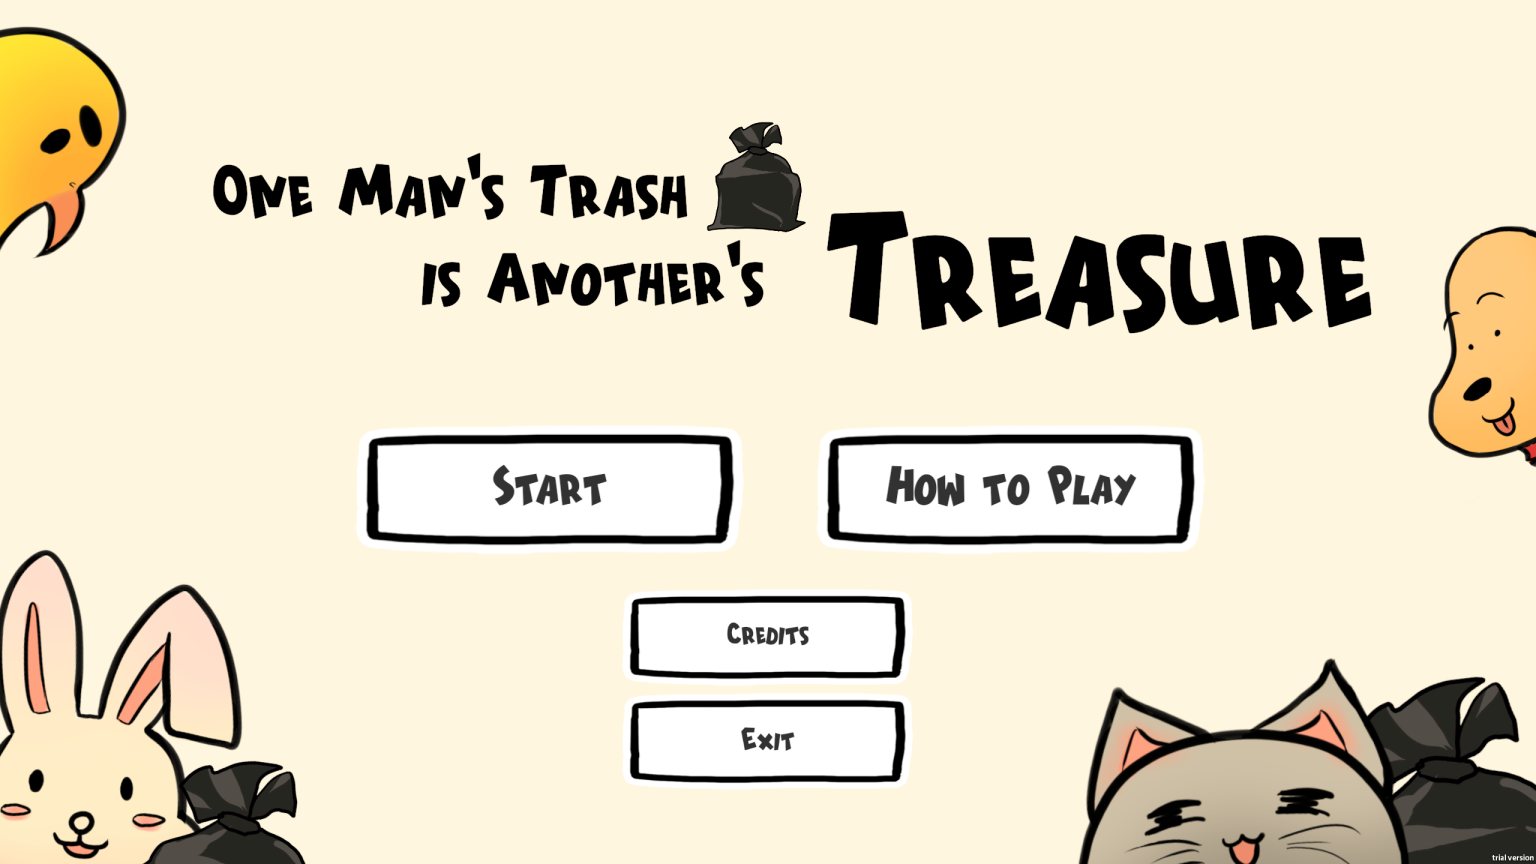 One Man's Trash is Another's Treasure